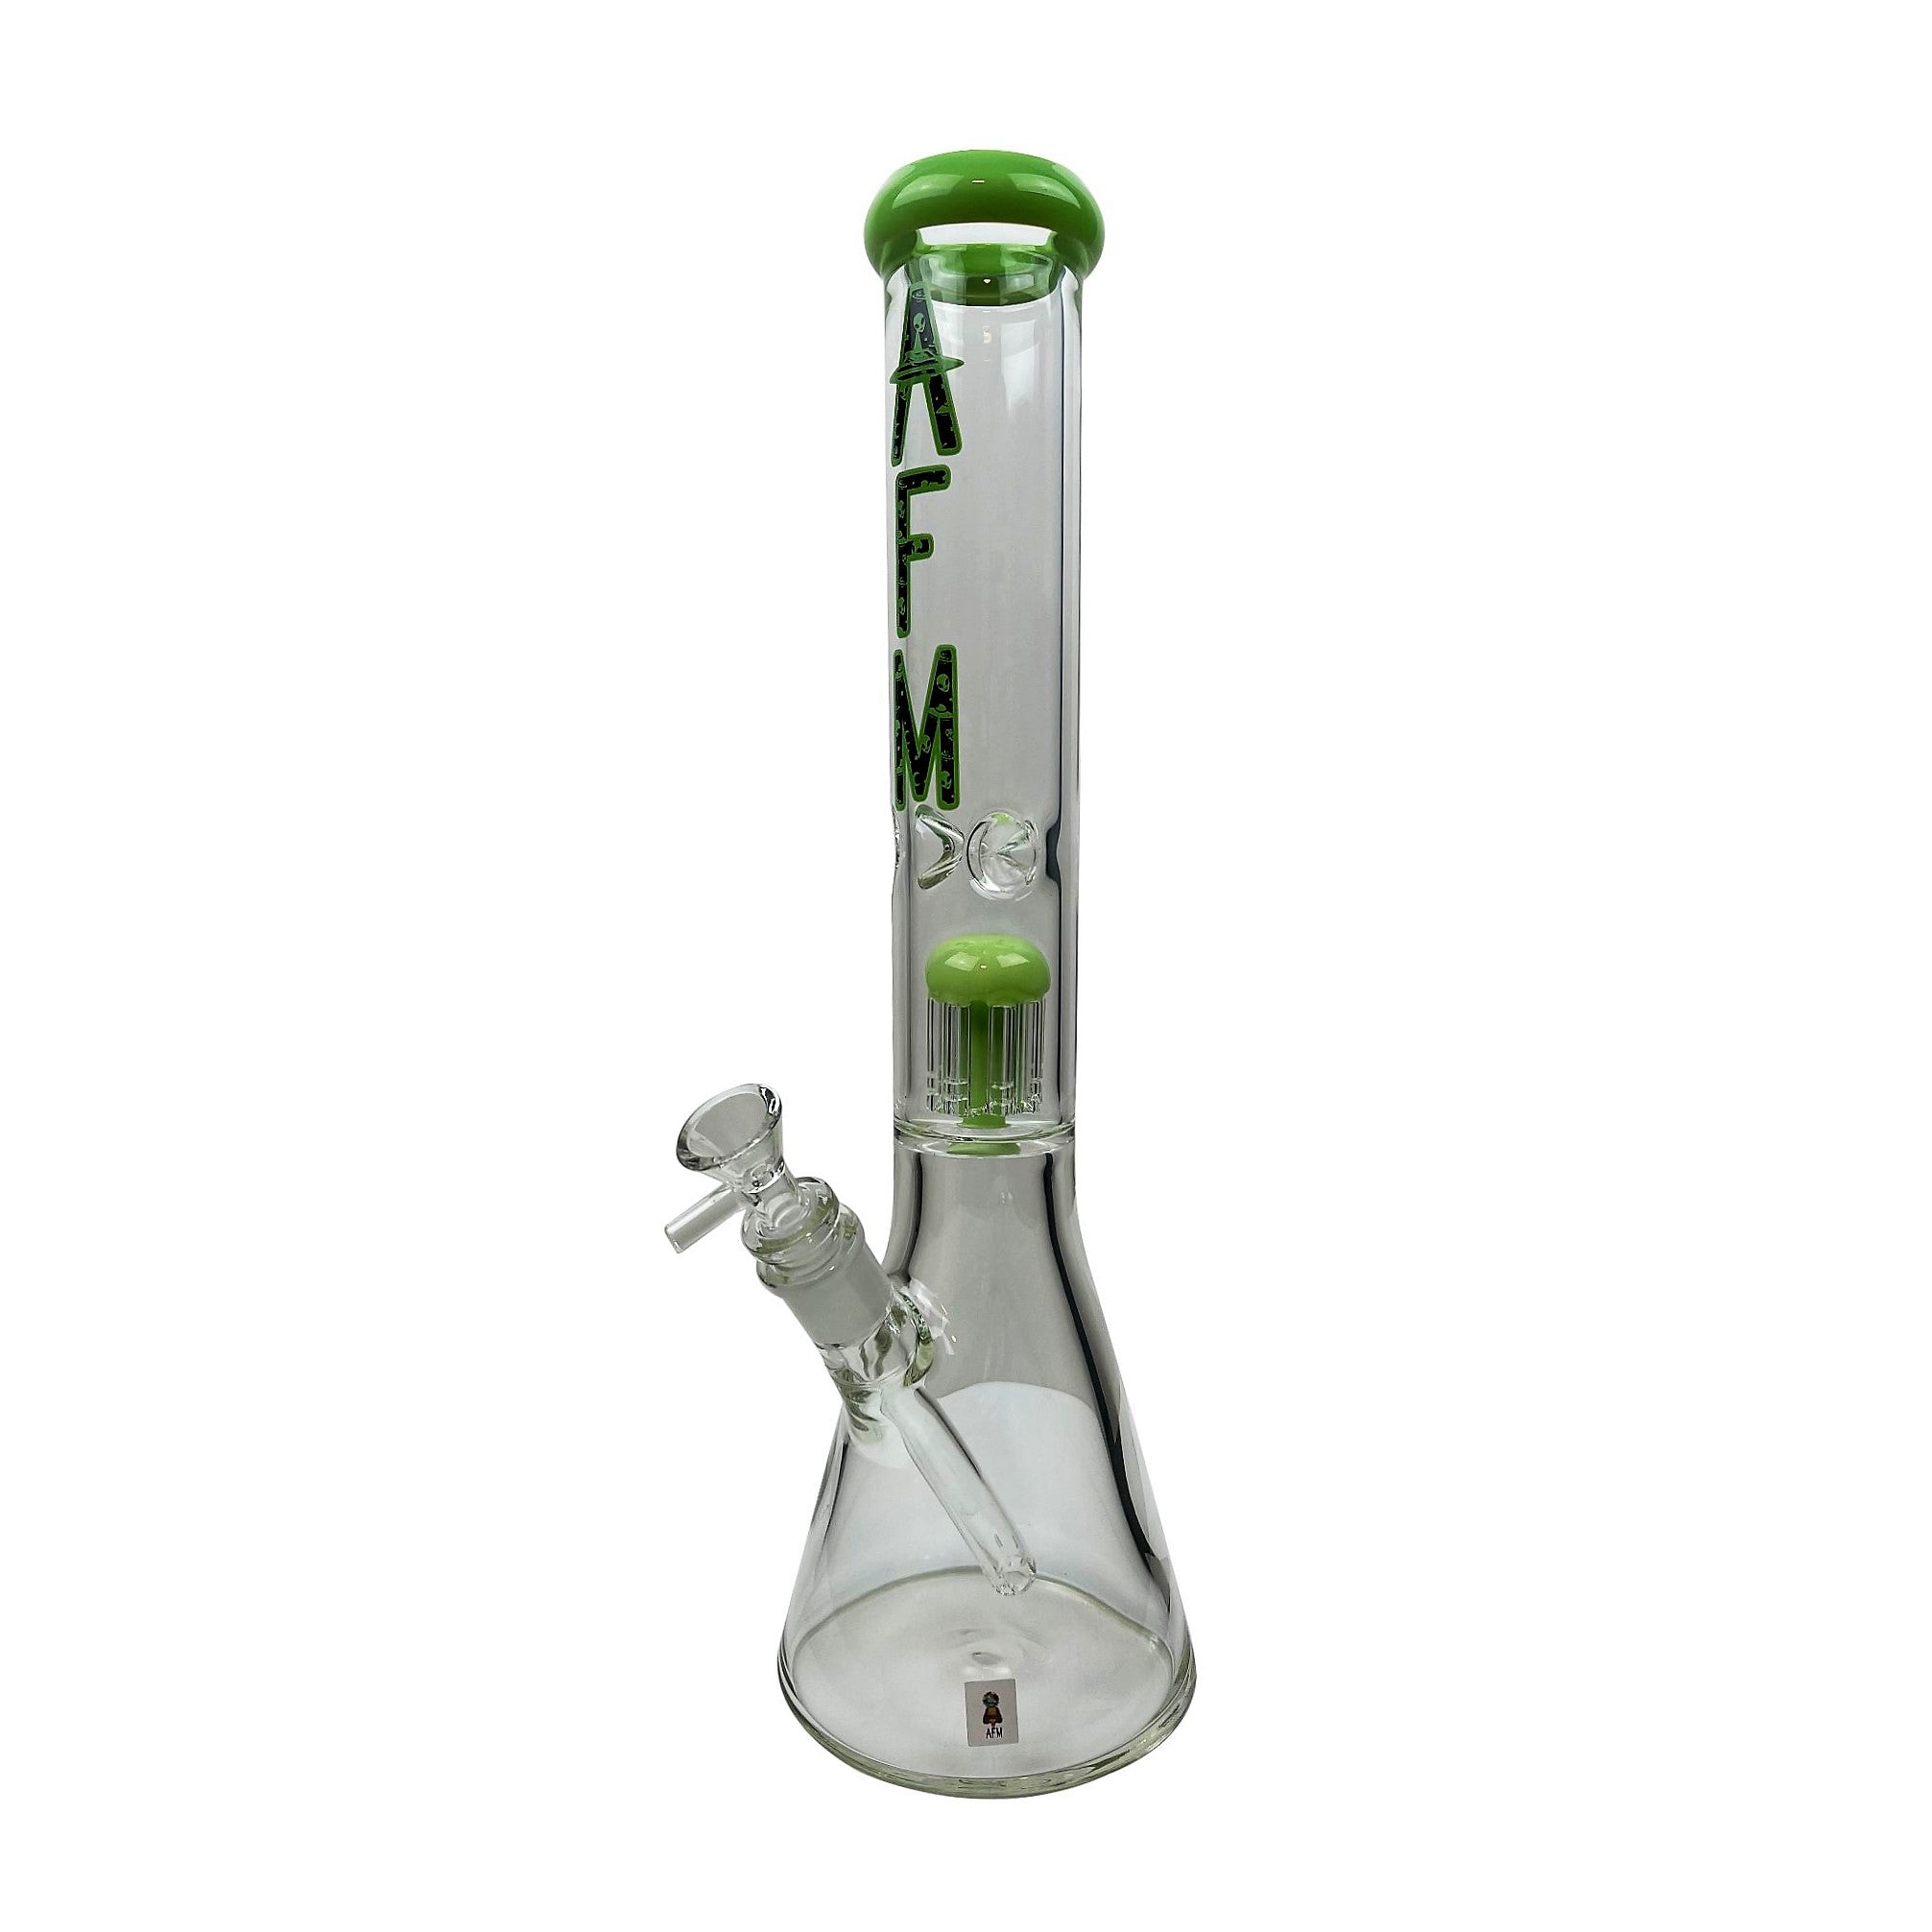 Glass Bong Stock Photos and Pictures - 6,124 Images